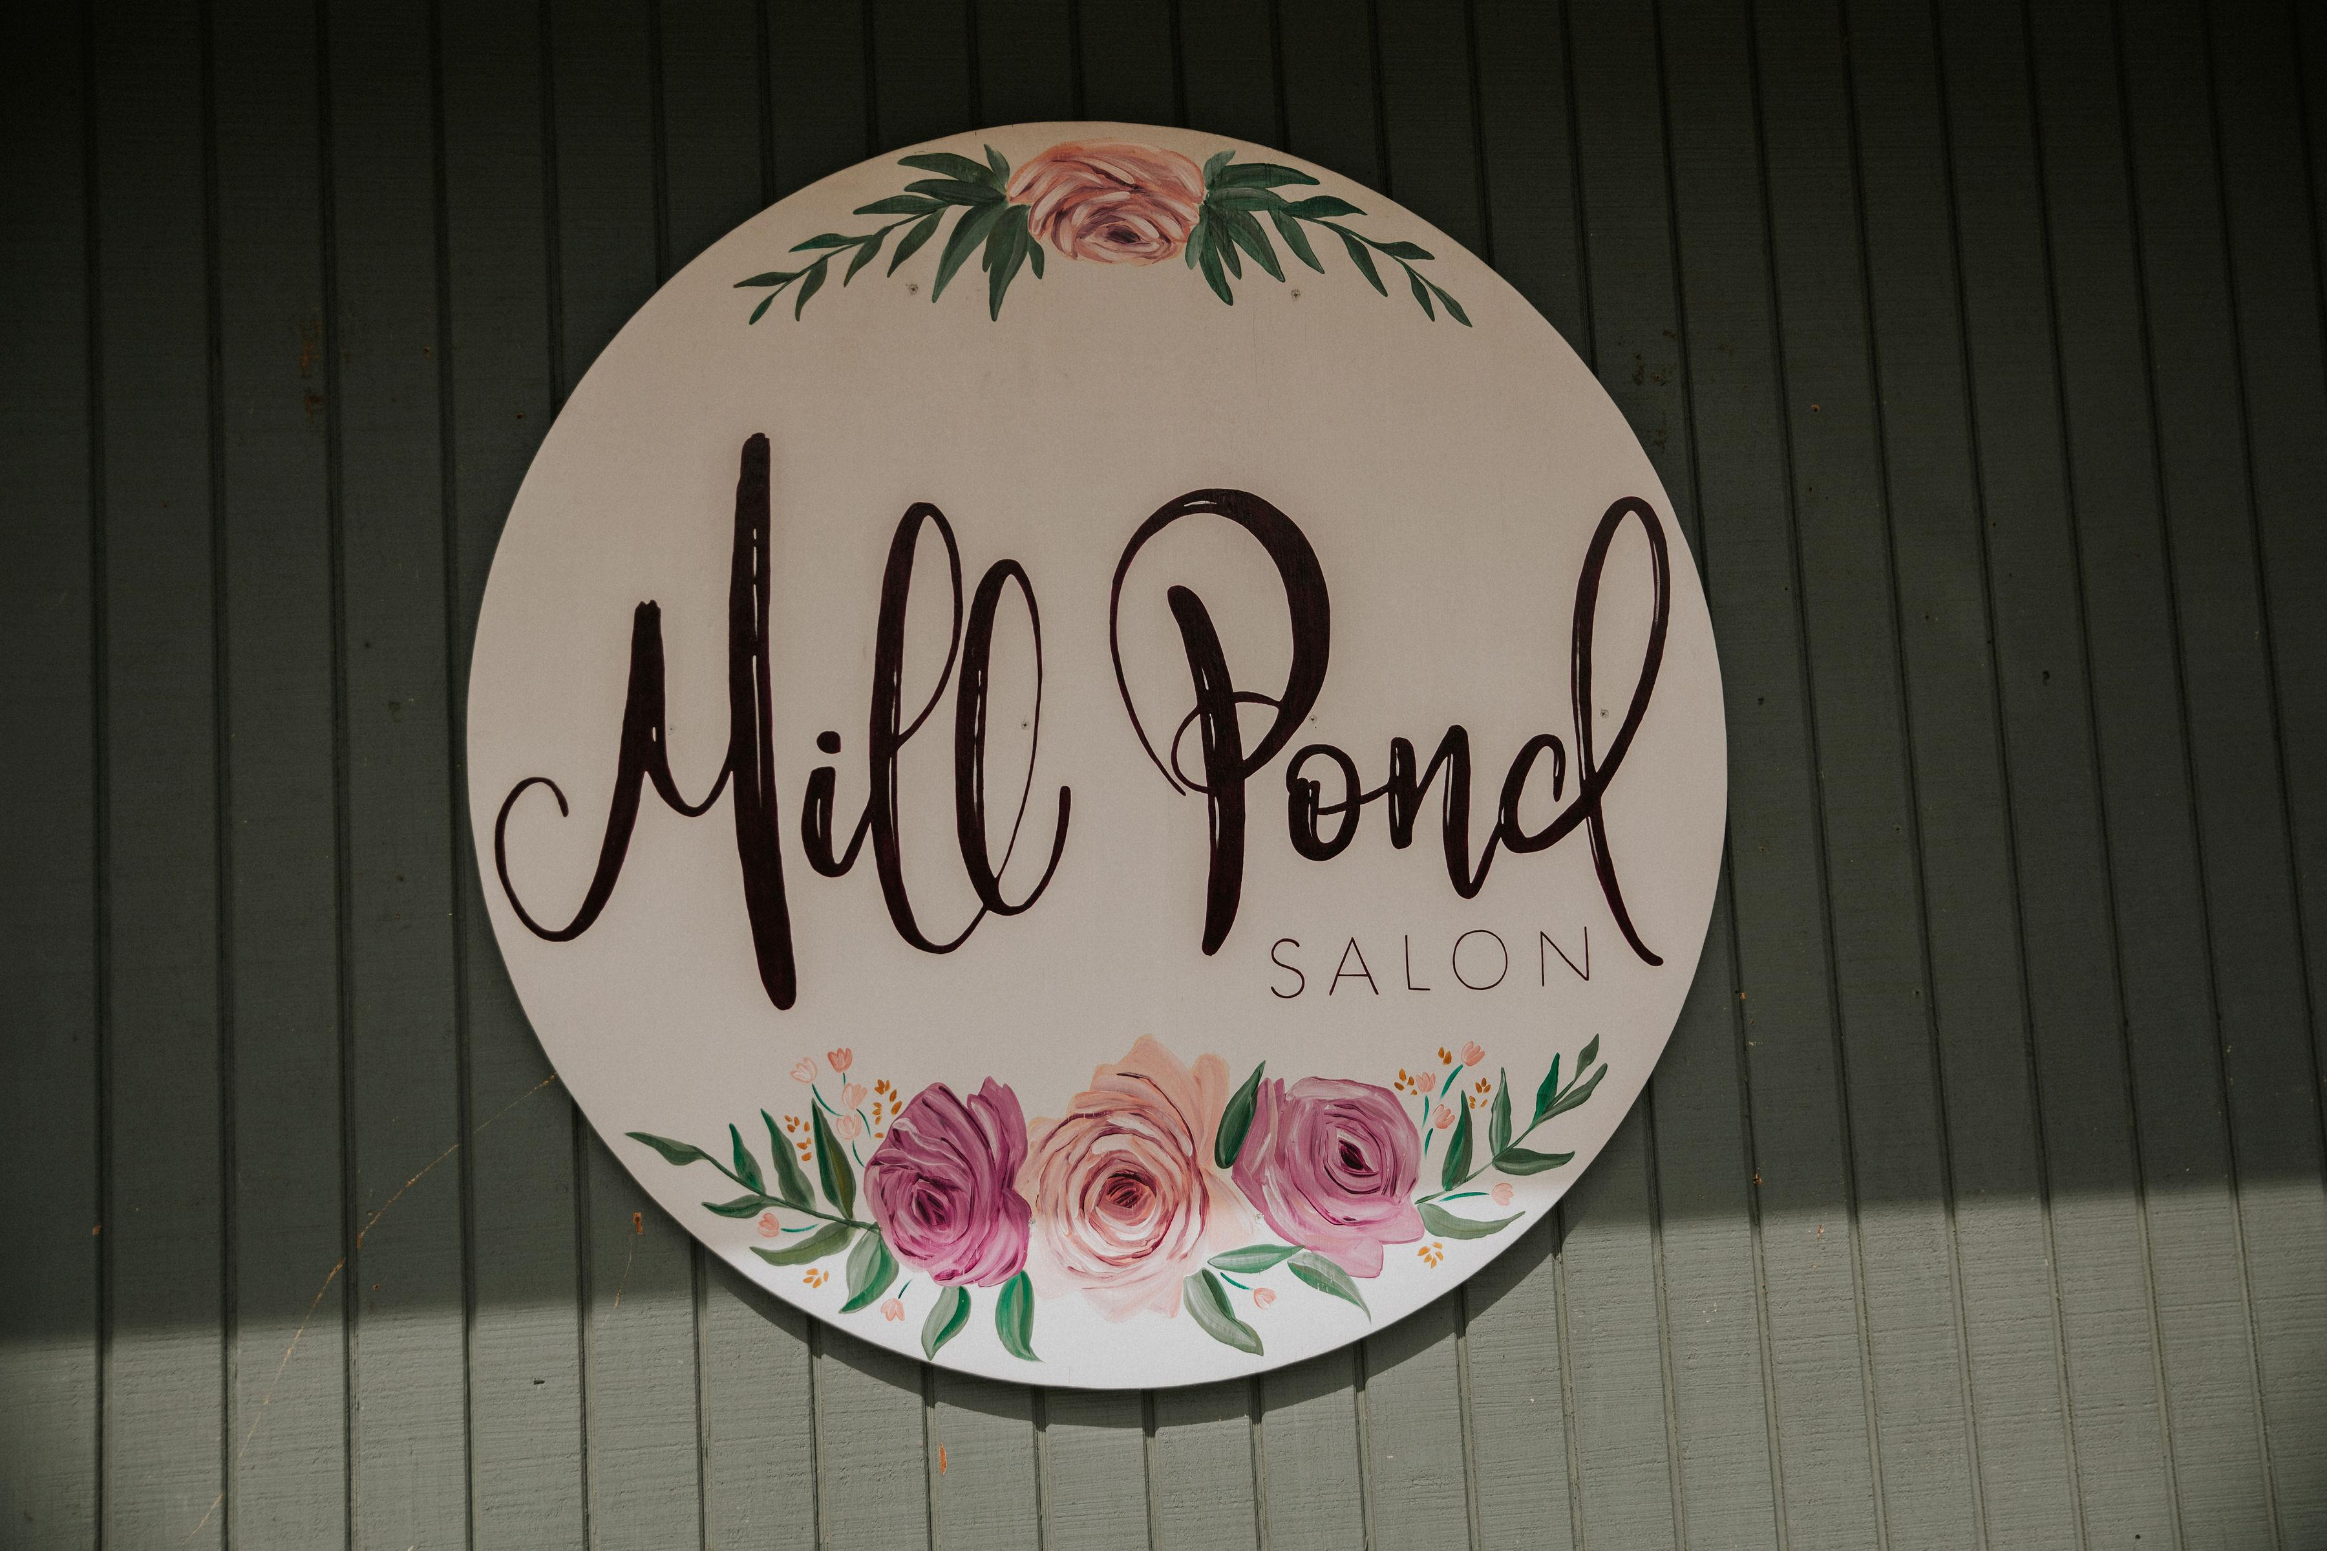 Get the Look You Want: Balayage vs. Foil - Mill Pond Salon